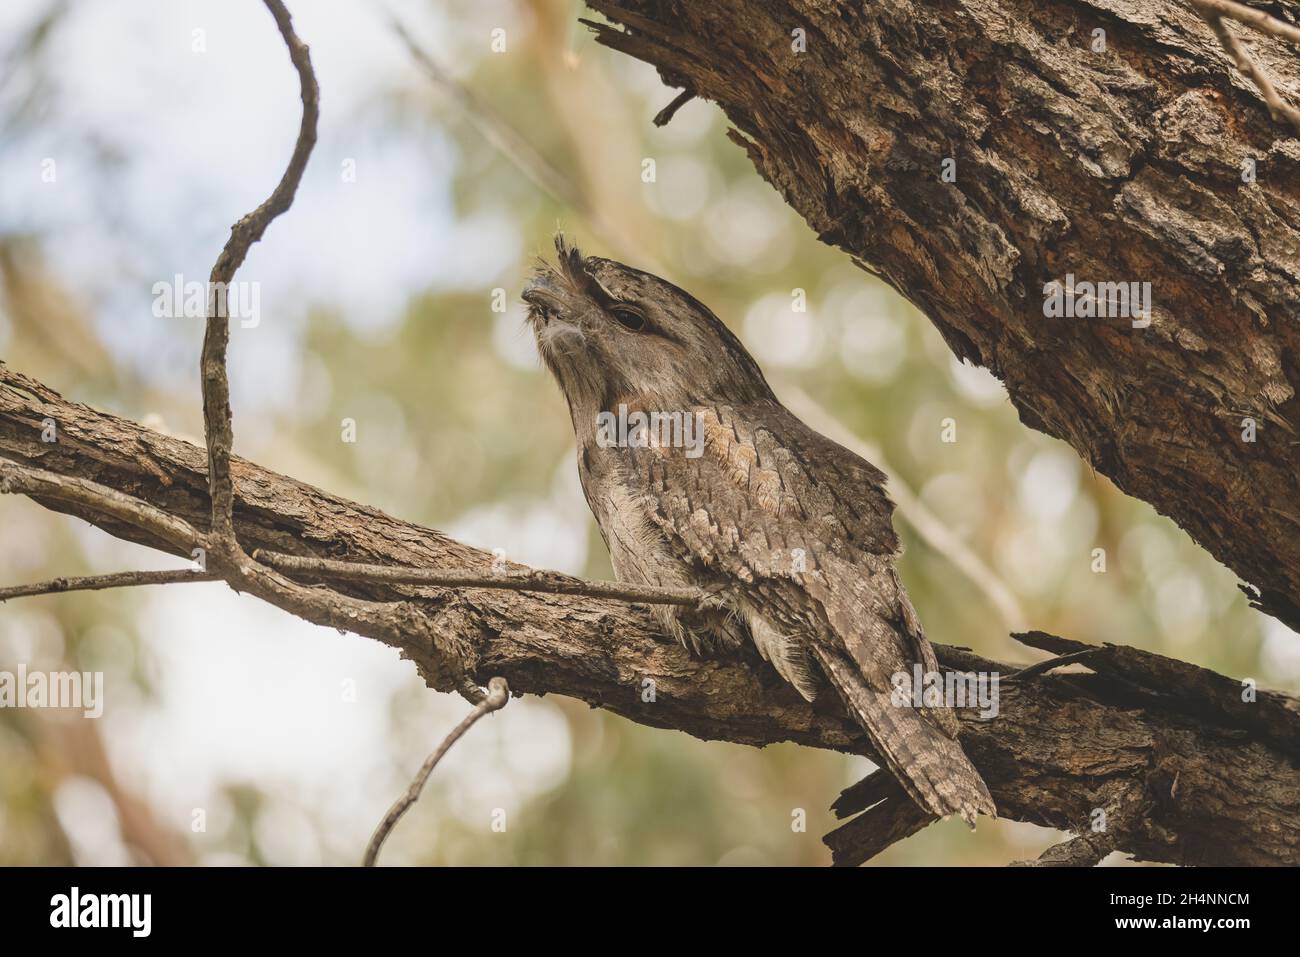 Tawny Frogmouth perched sleeping by day on a Tree Stock Photo